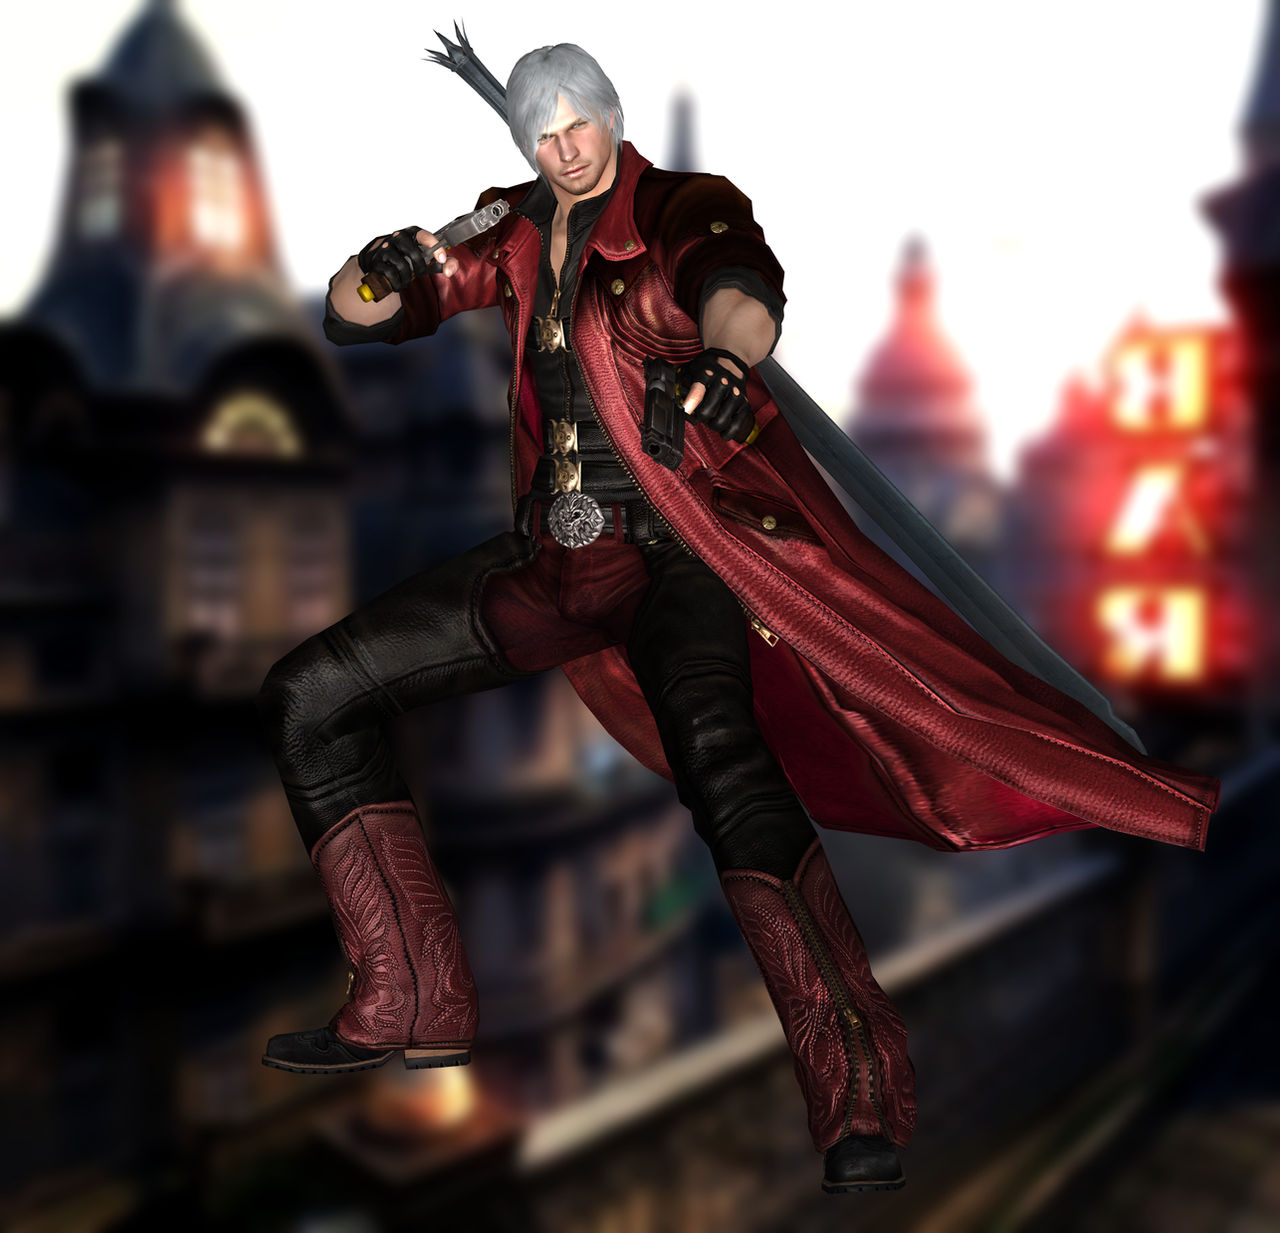 Devil may cry 4 Special edition by Taitiii on DeviantArt